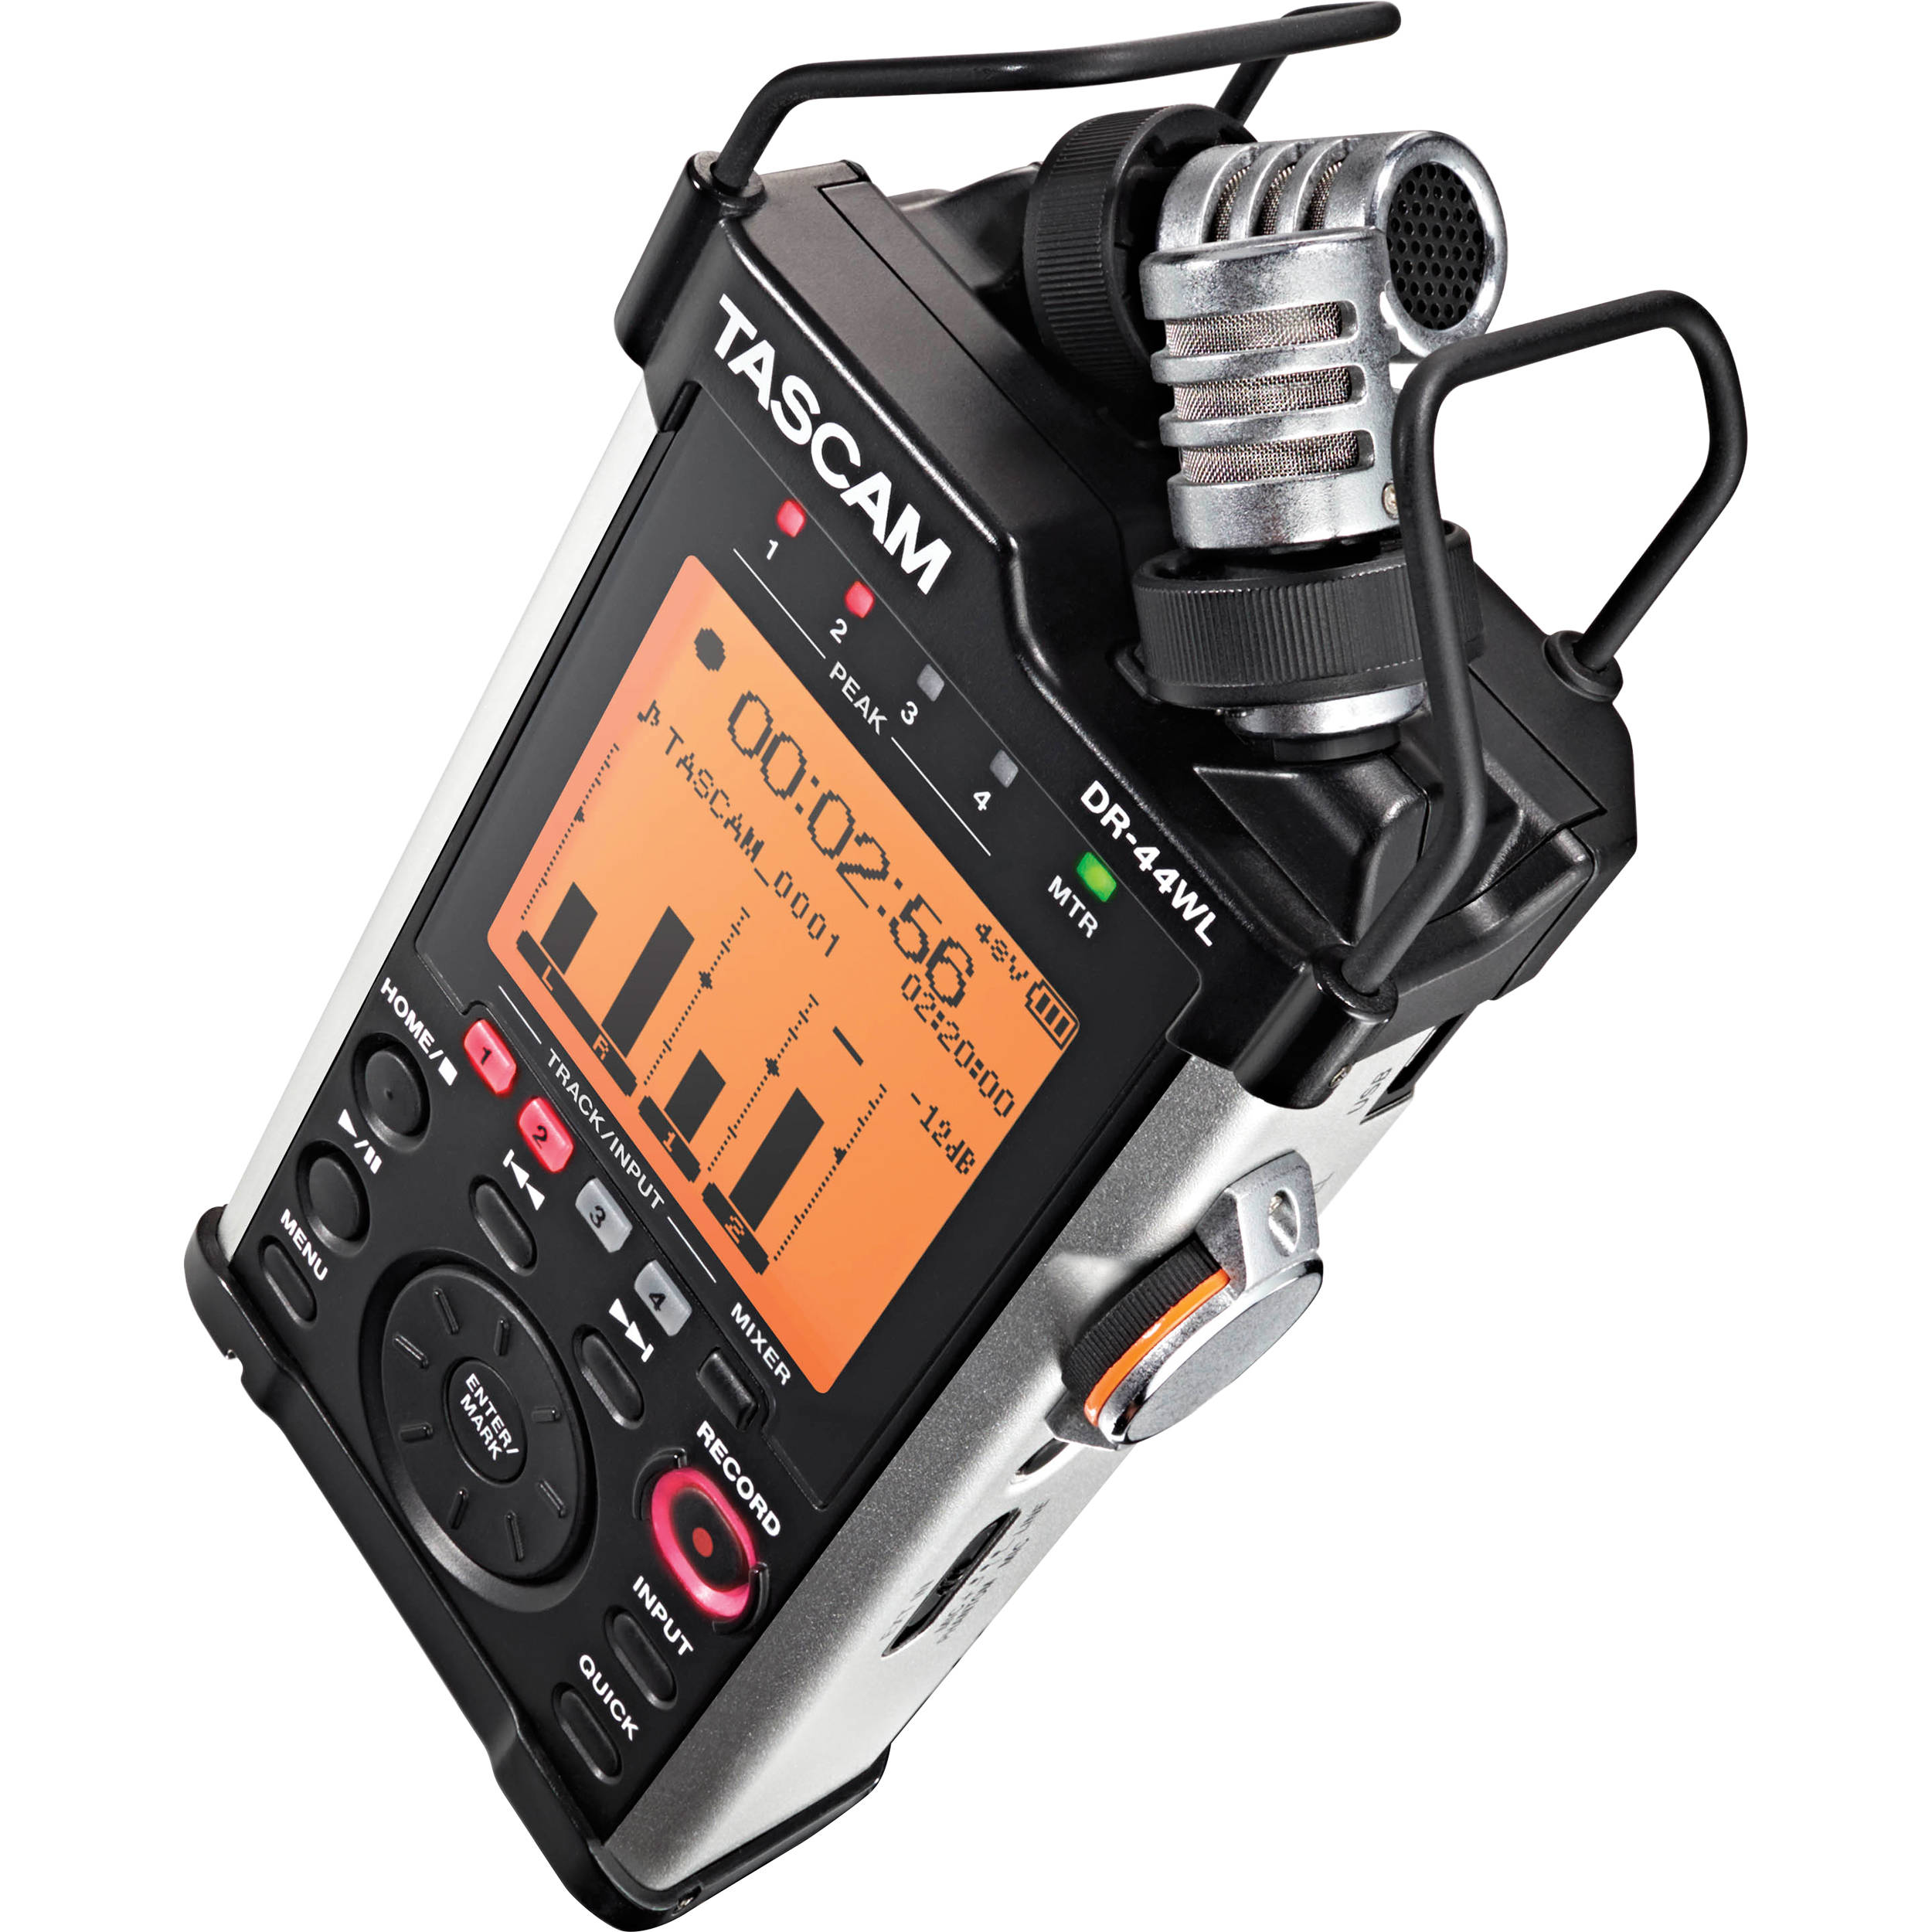 Tascam Portable Recorder with XLR and WiFi 